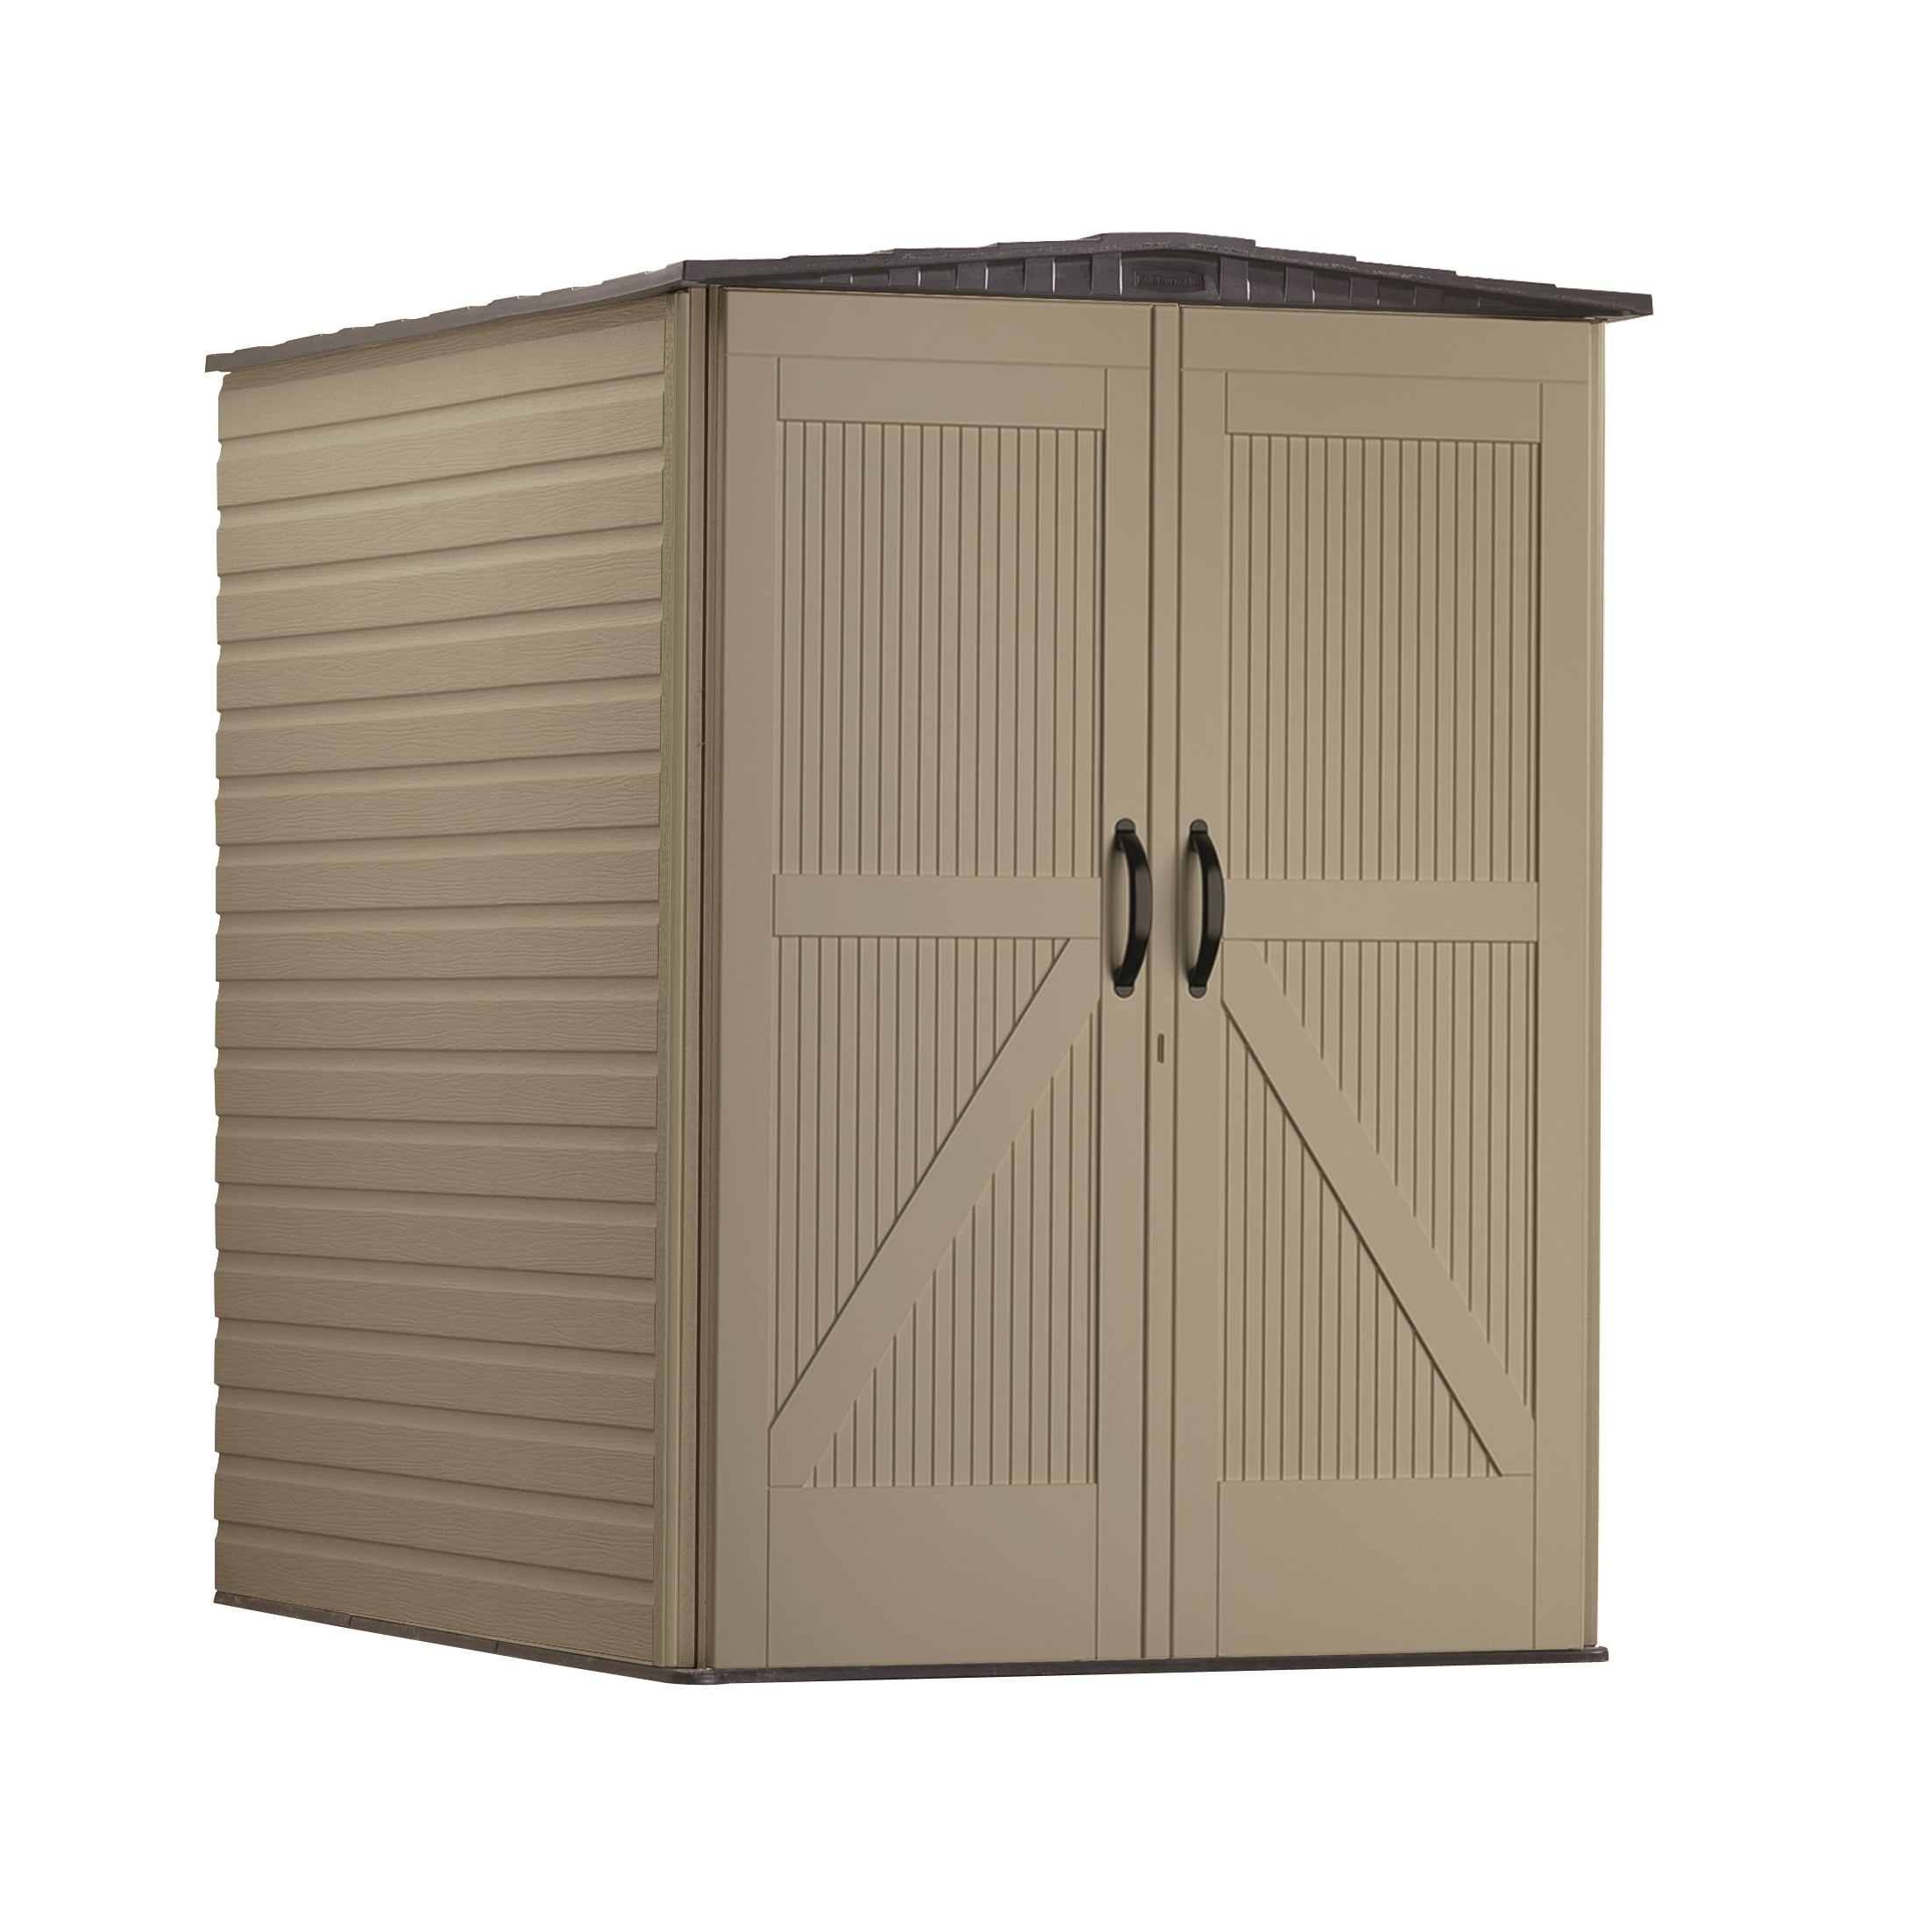 Rubbermaid Large 5x6 Ft Resin Weather Resistant Outdoor Storage Shed,  Sandstone, 1 Piece - King Soopers